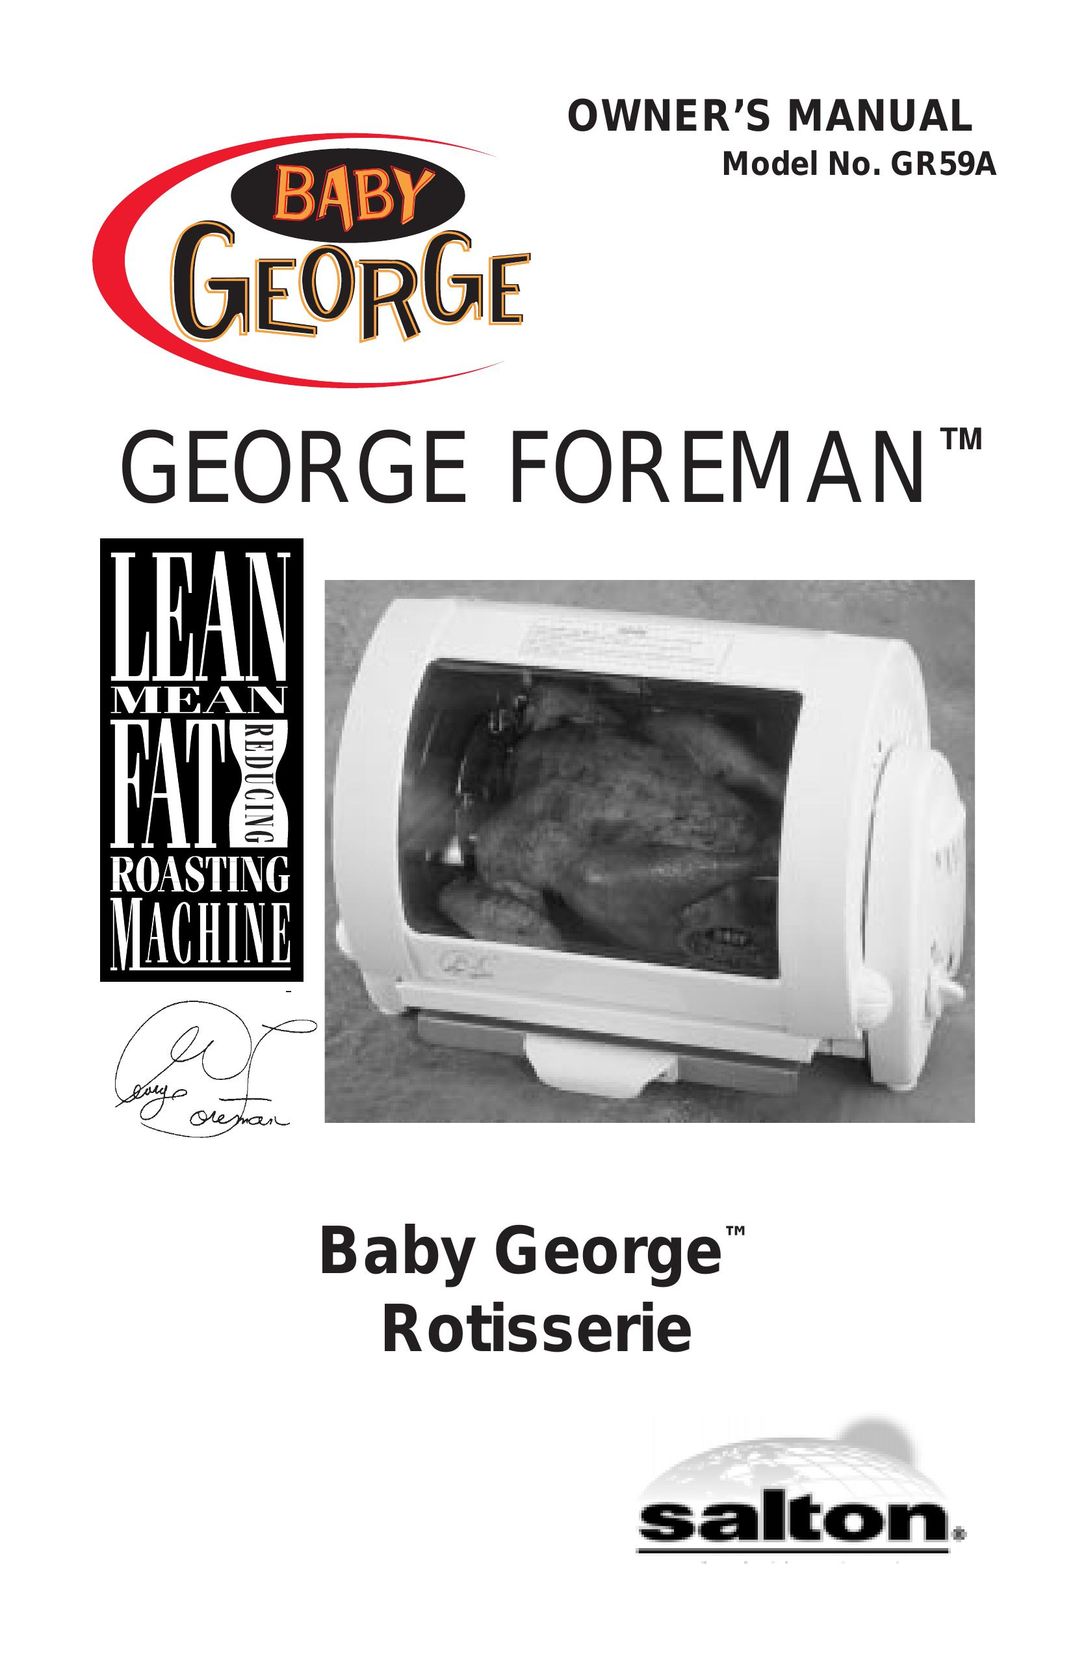 George Foreman GR59A Oven User Manual